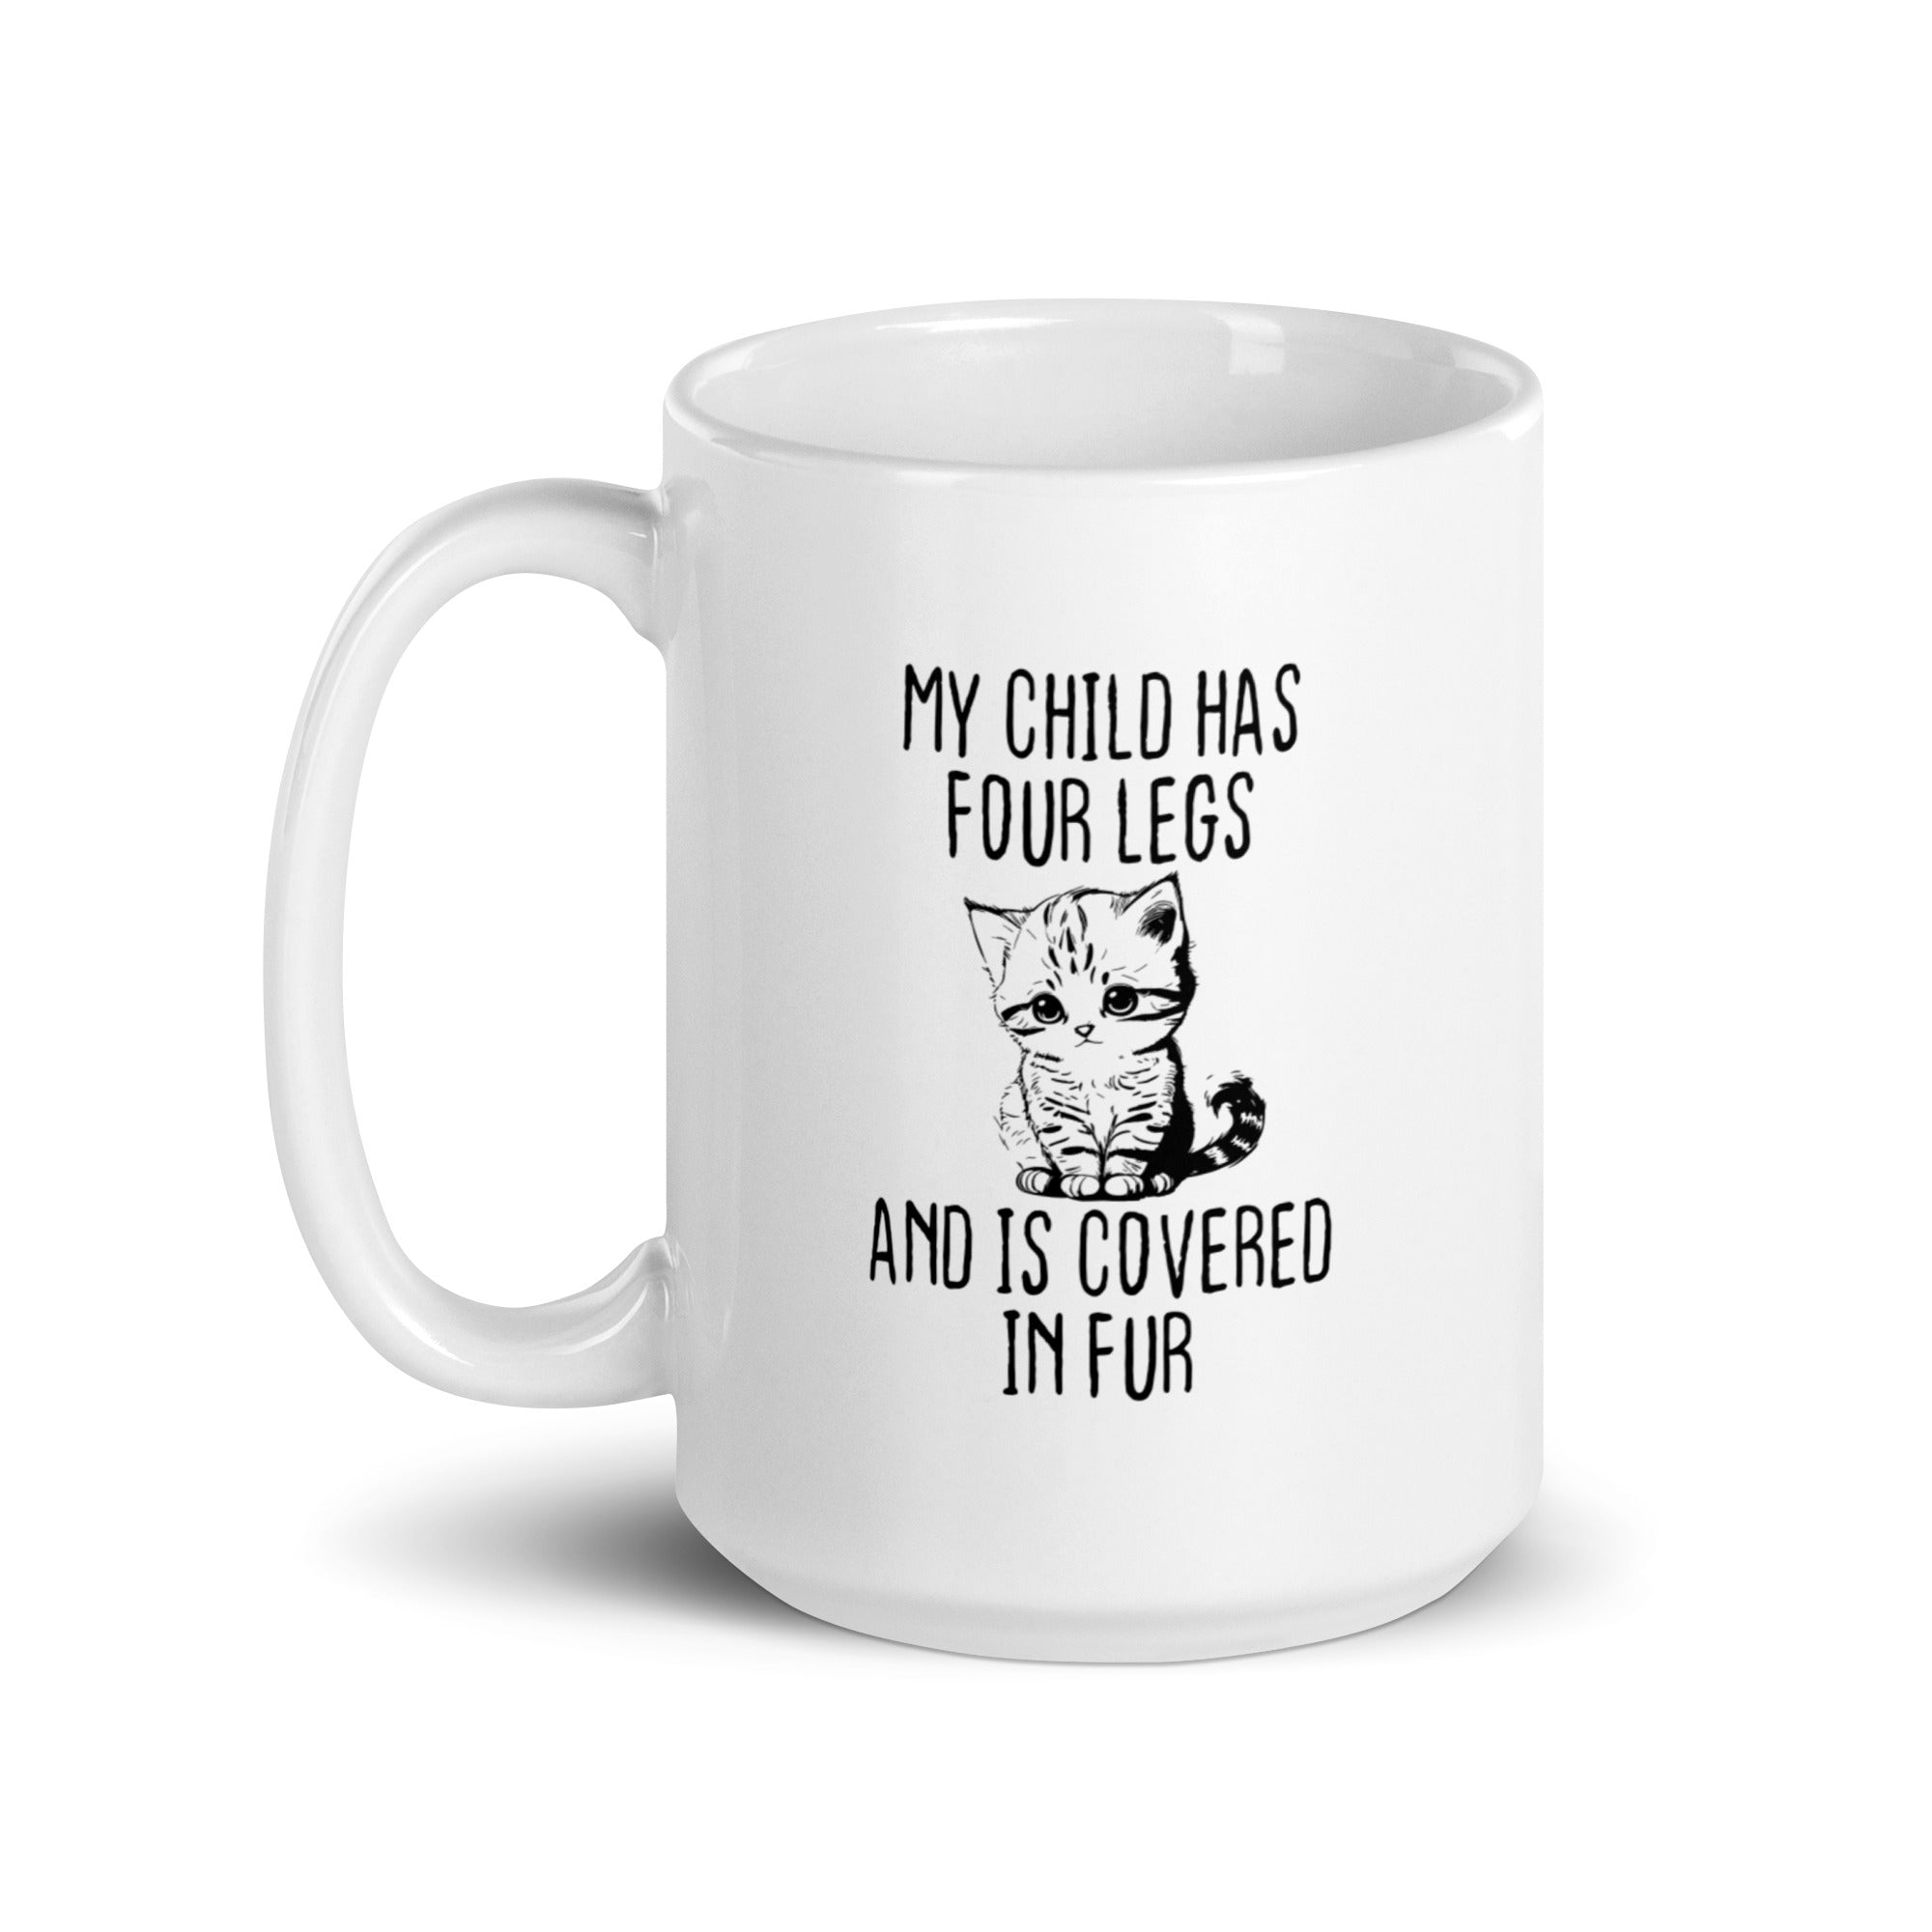 White glossy mug | My child has four legs and is covered in fur